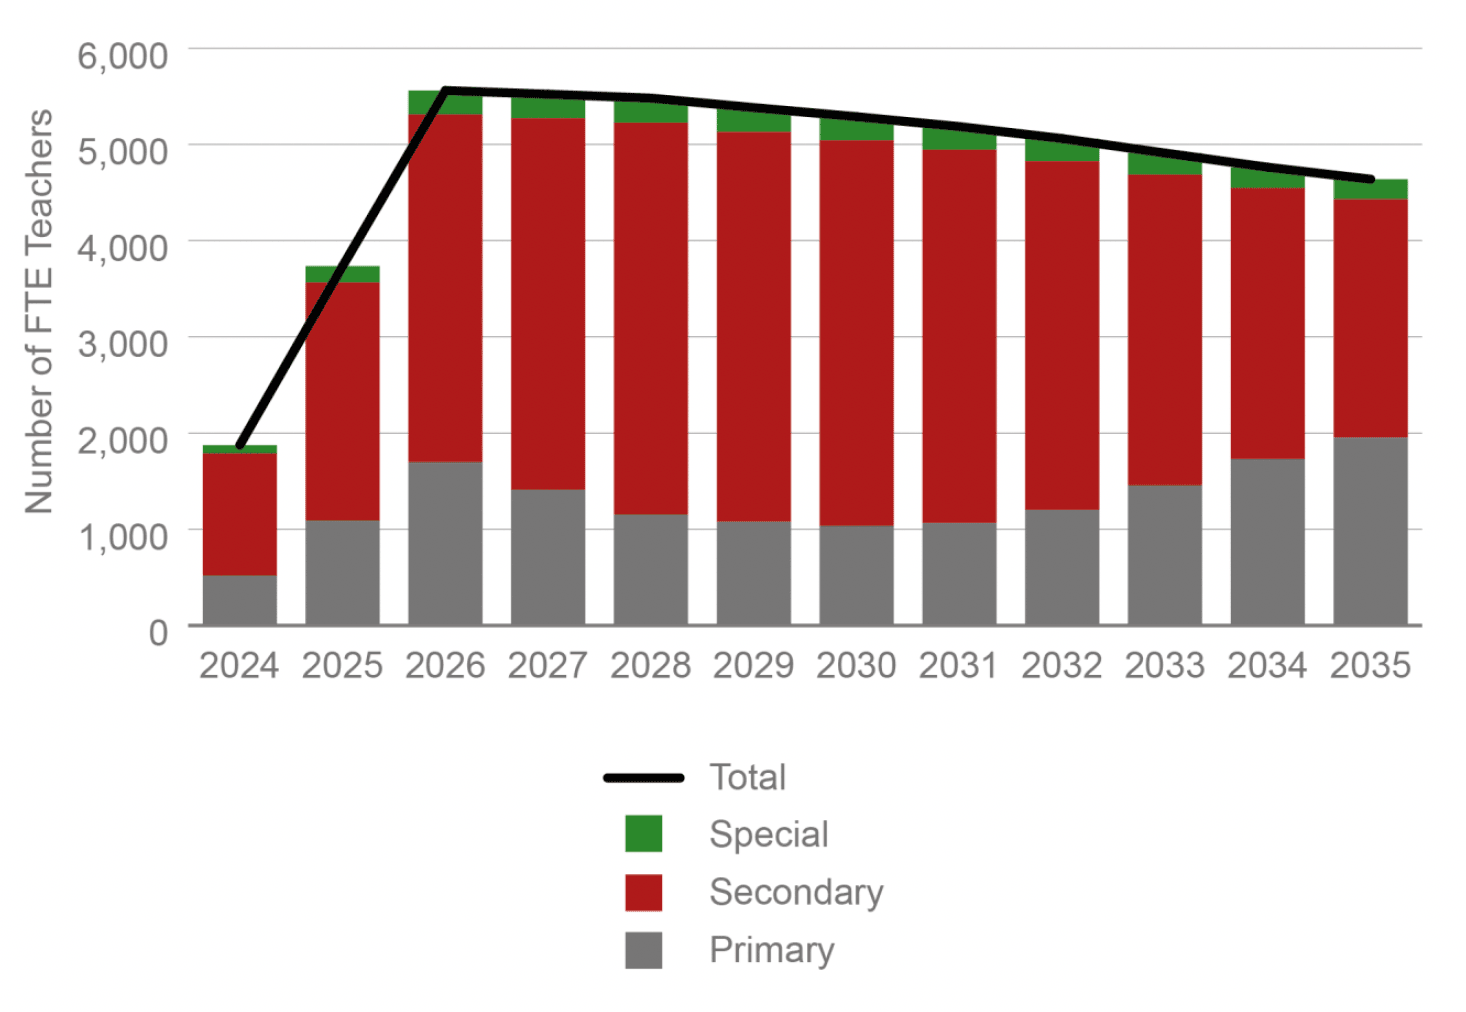 Combination chart with a line plot showing how increasing the PTR whilst reducing class contact time would require teacher redeployment across every year to 2035. This redeployment would be required to happen at an increasing rate initially.